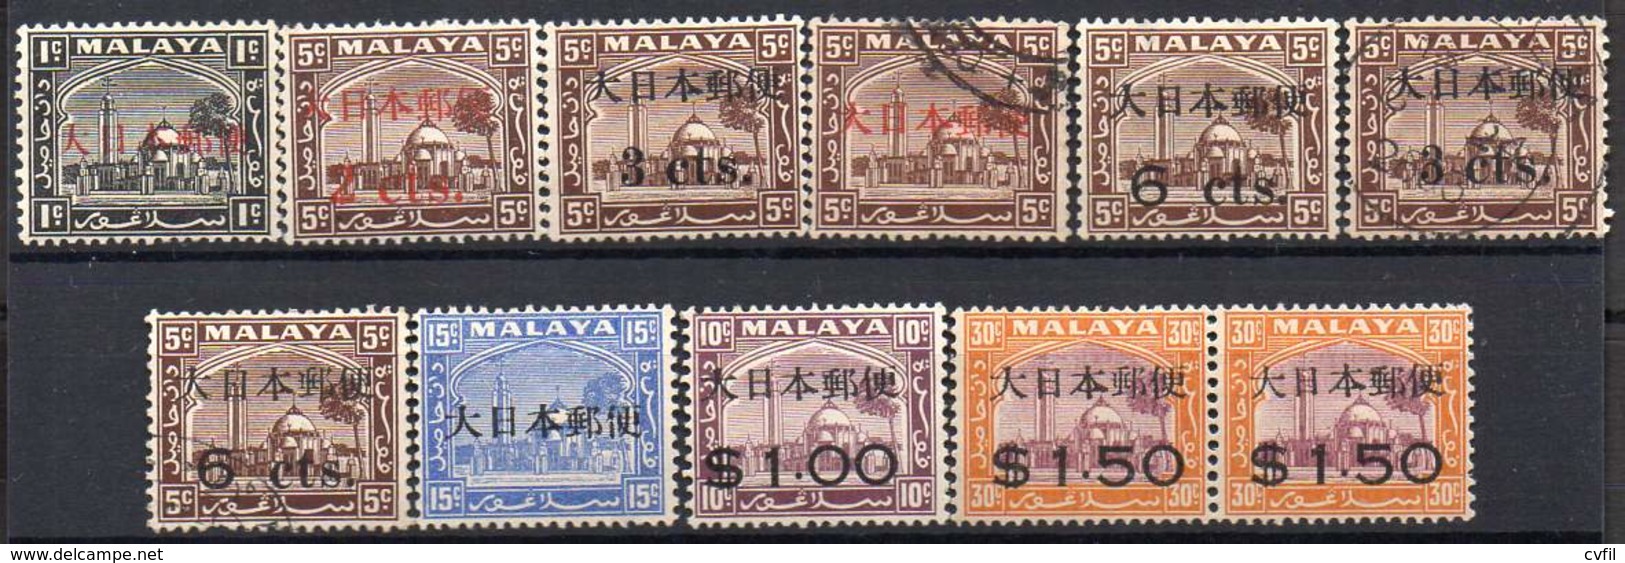 MALAYA, JAPANESE OCCUPATION 1942. 11 Values Ovptd On Selangor. Mint LH And Used - Japanese Occupation